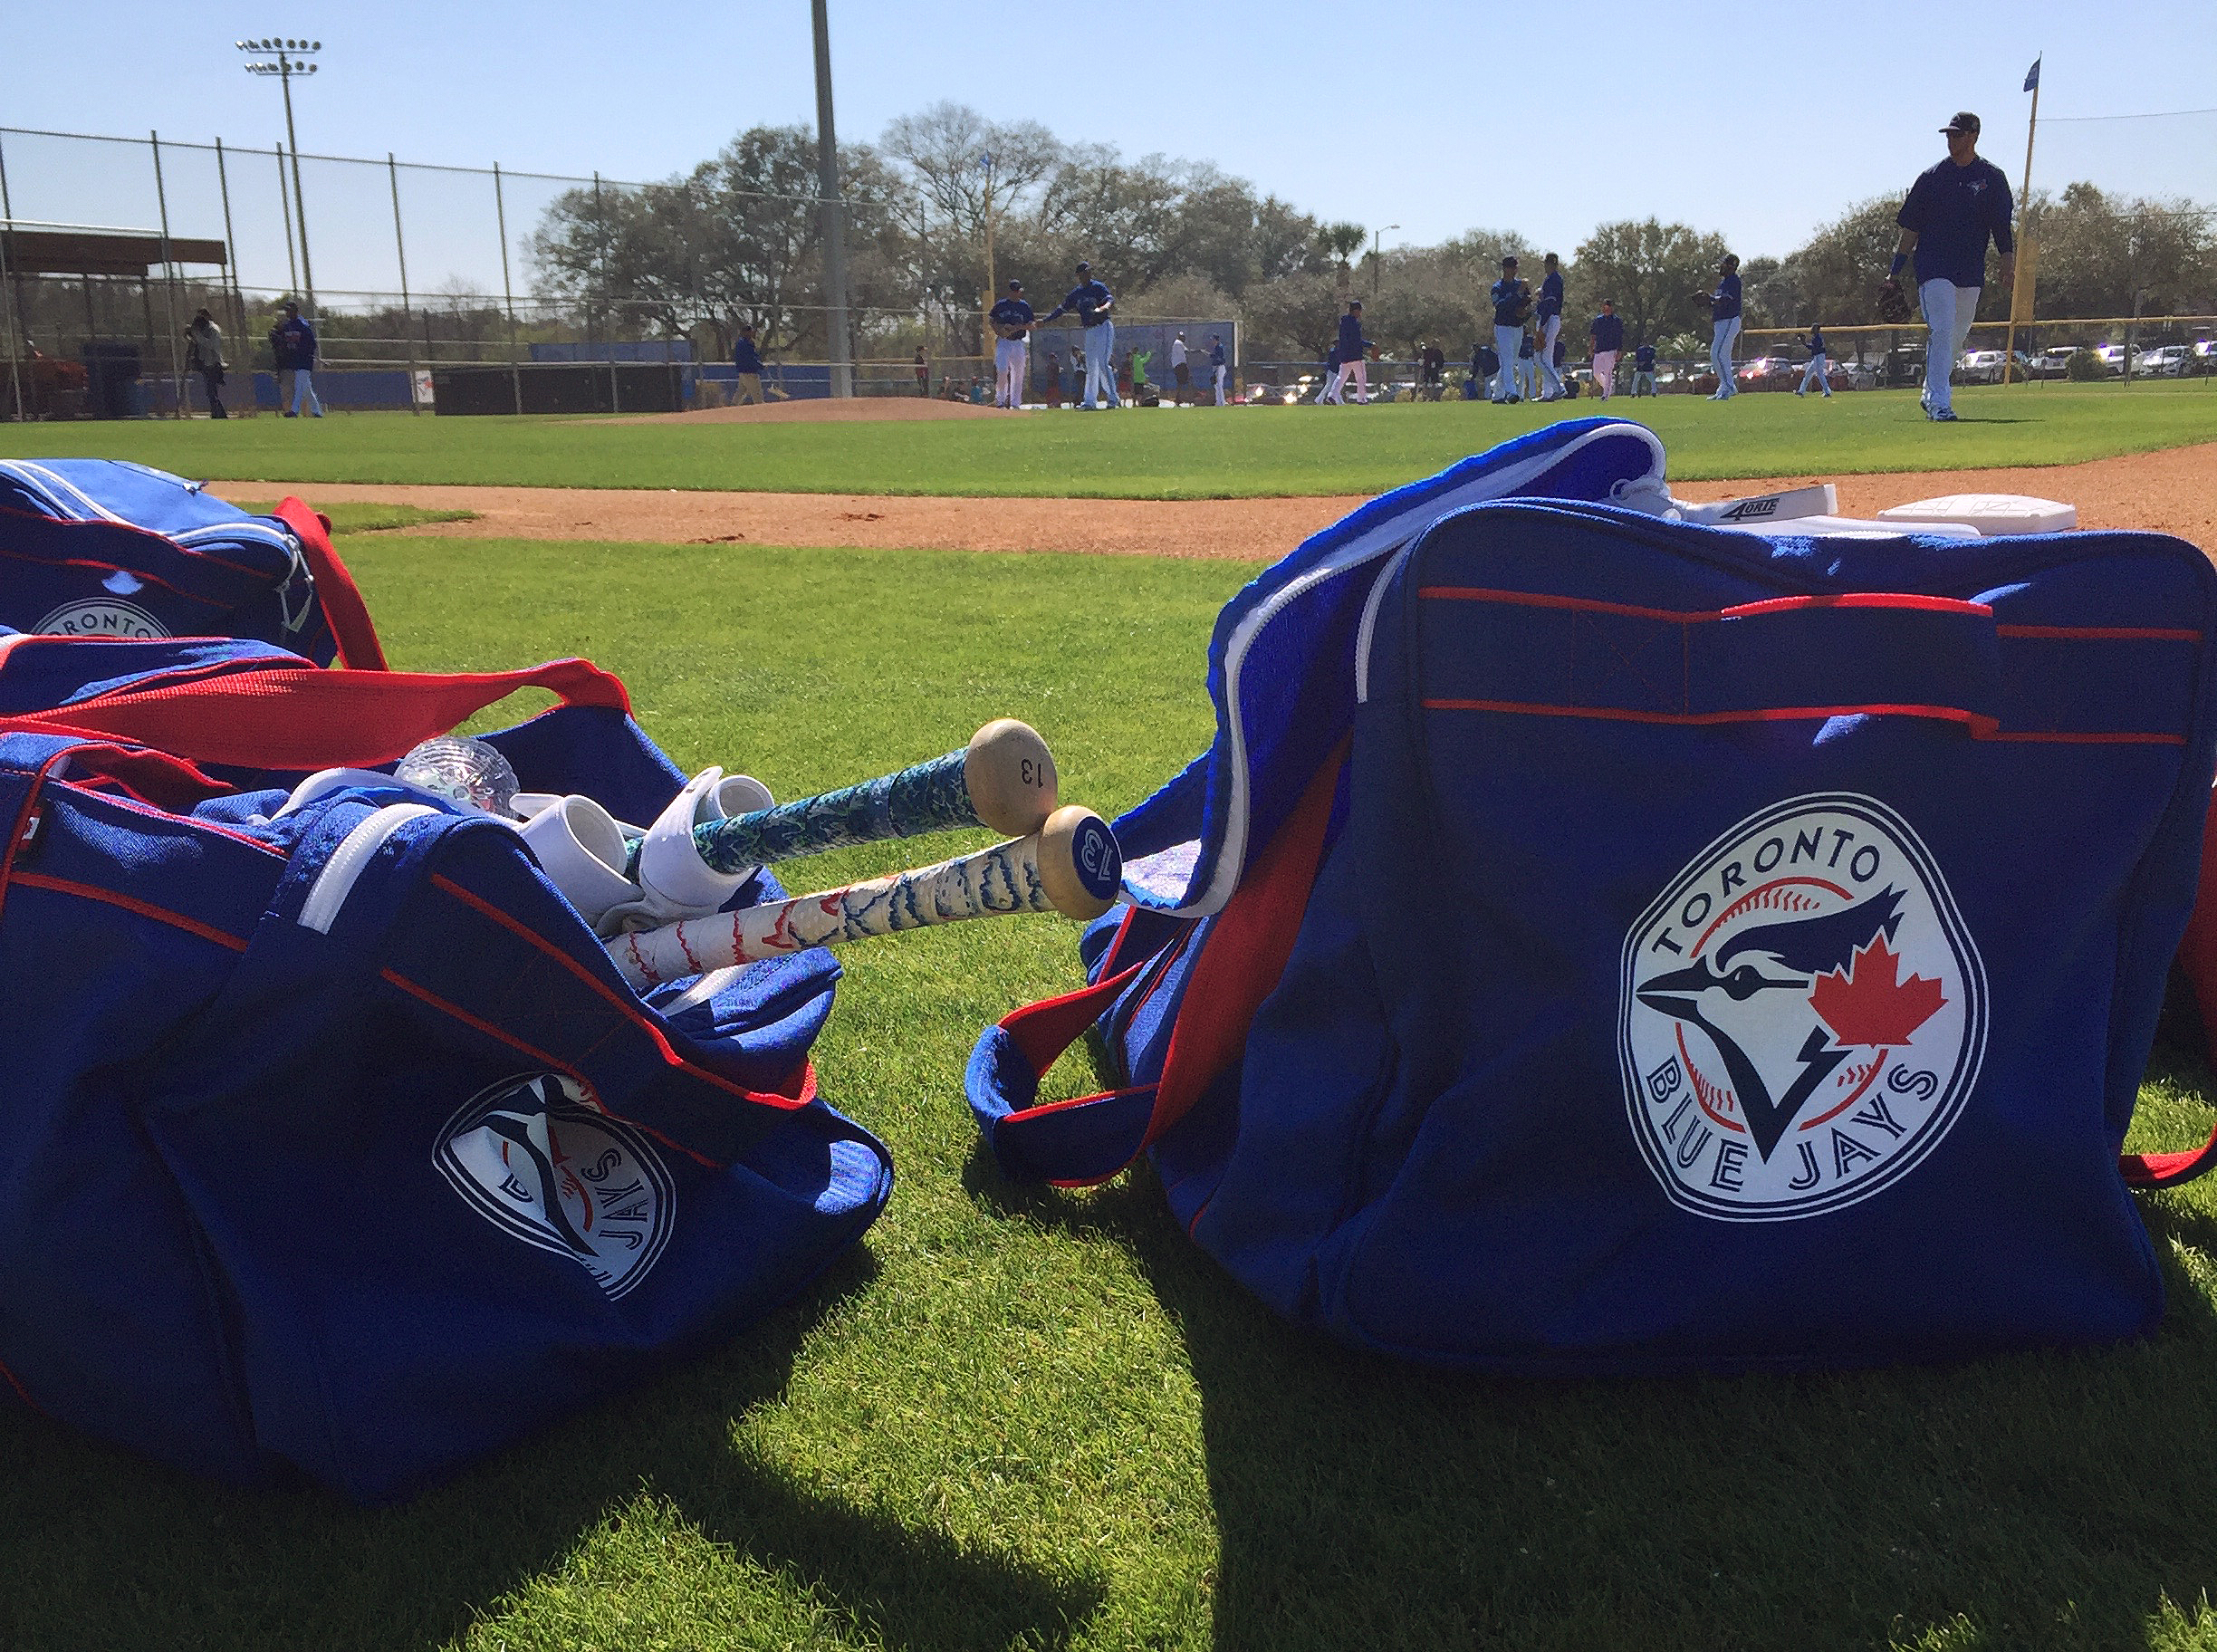 Official Toronto Blue Jays bags, baseball bats, shoes and gloves rest on the field as players train in the background at spring training.